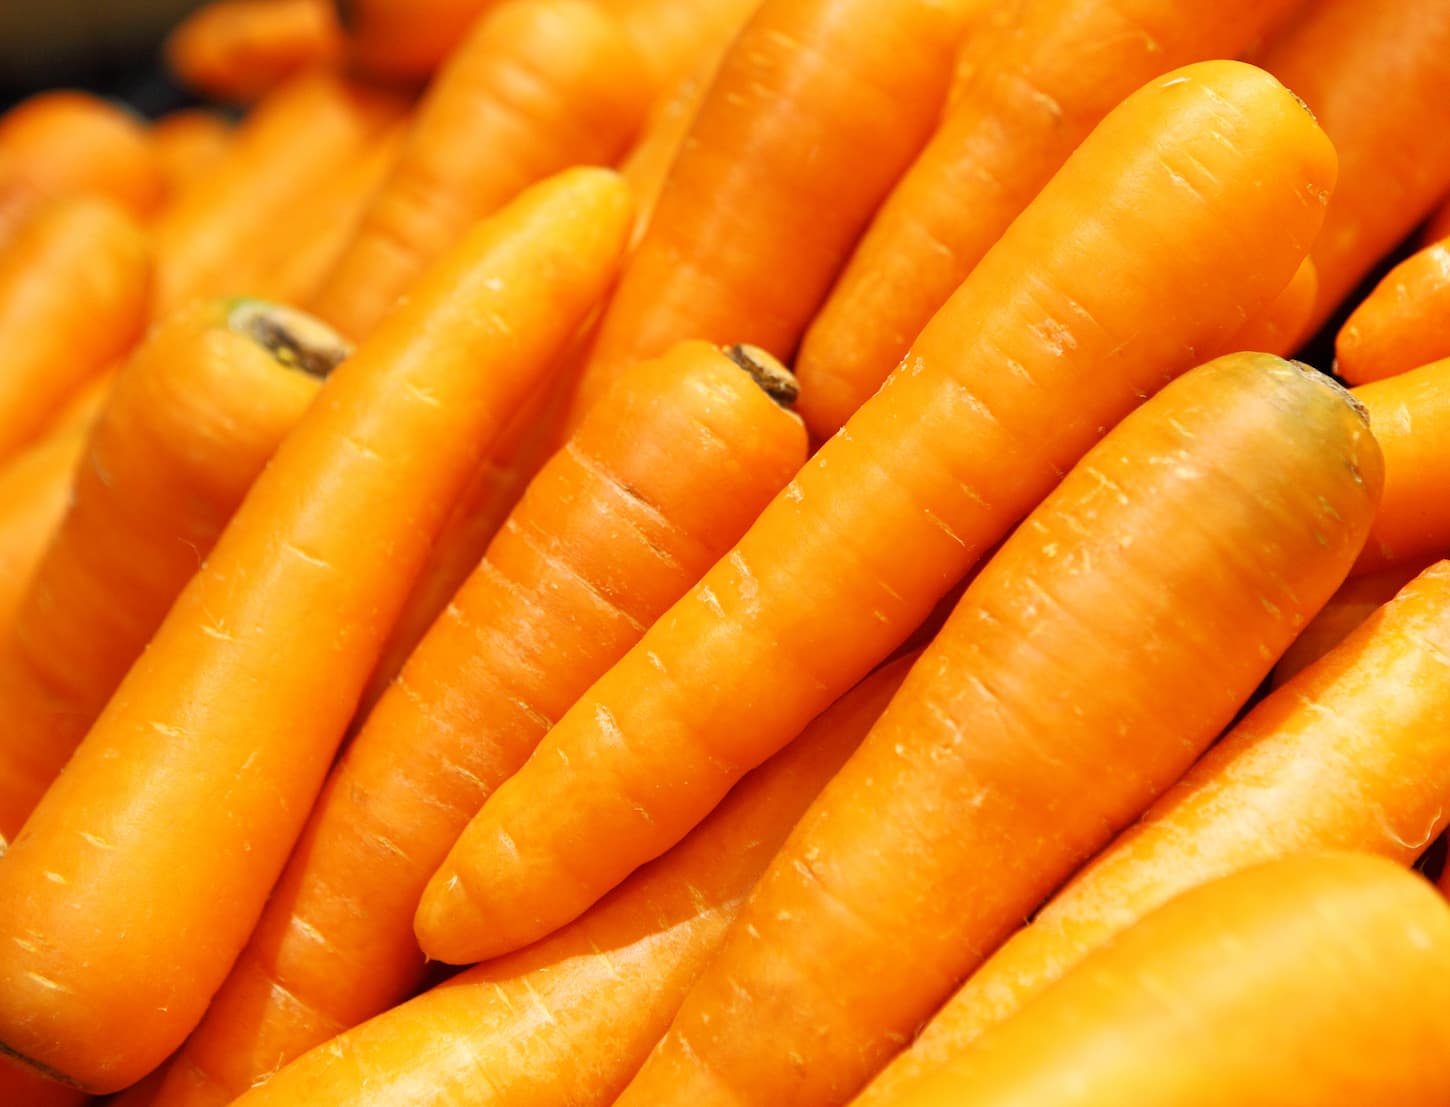 Can Carrots Grow on Trees?